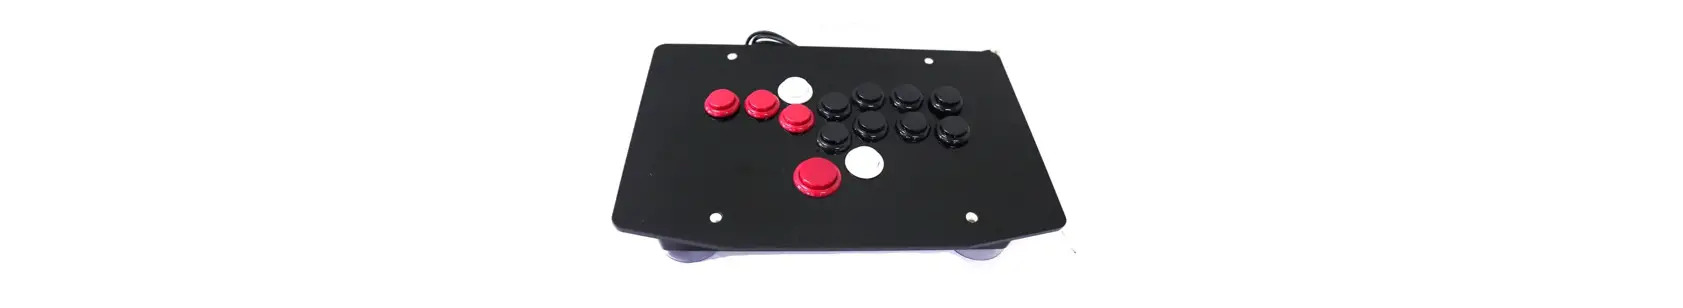 Fighting Game Button Controllers and Joysticks